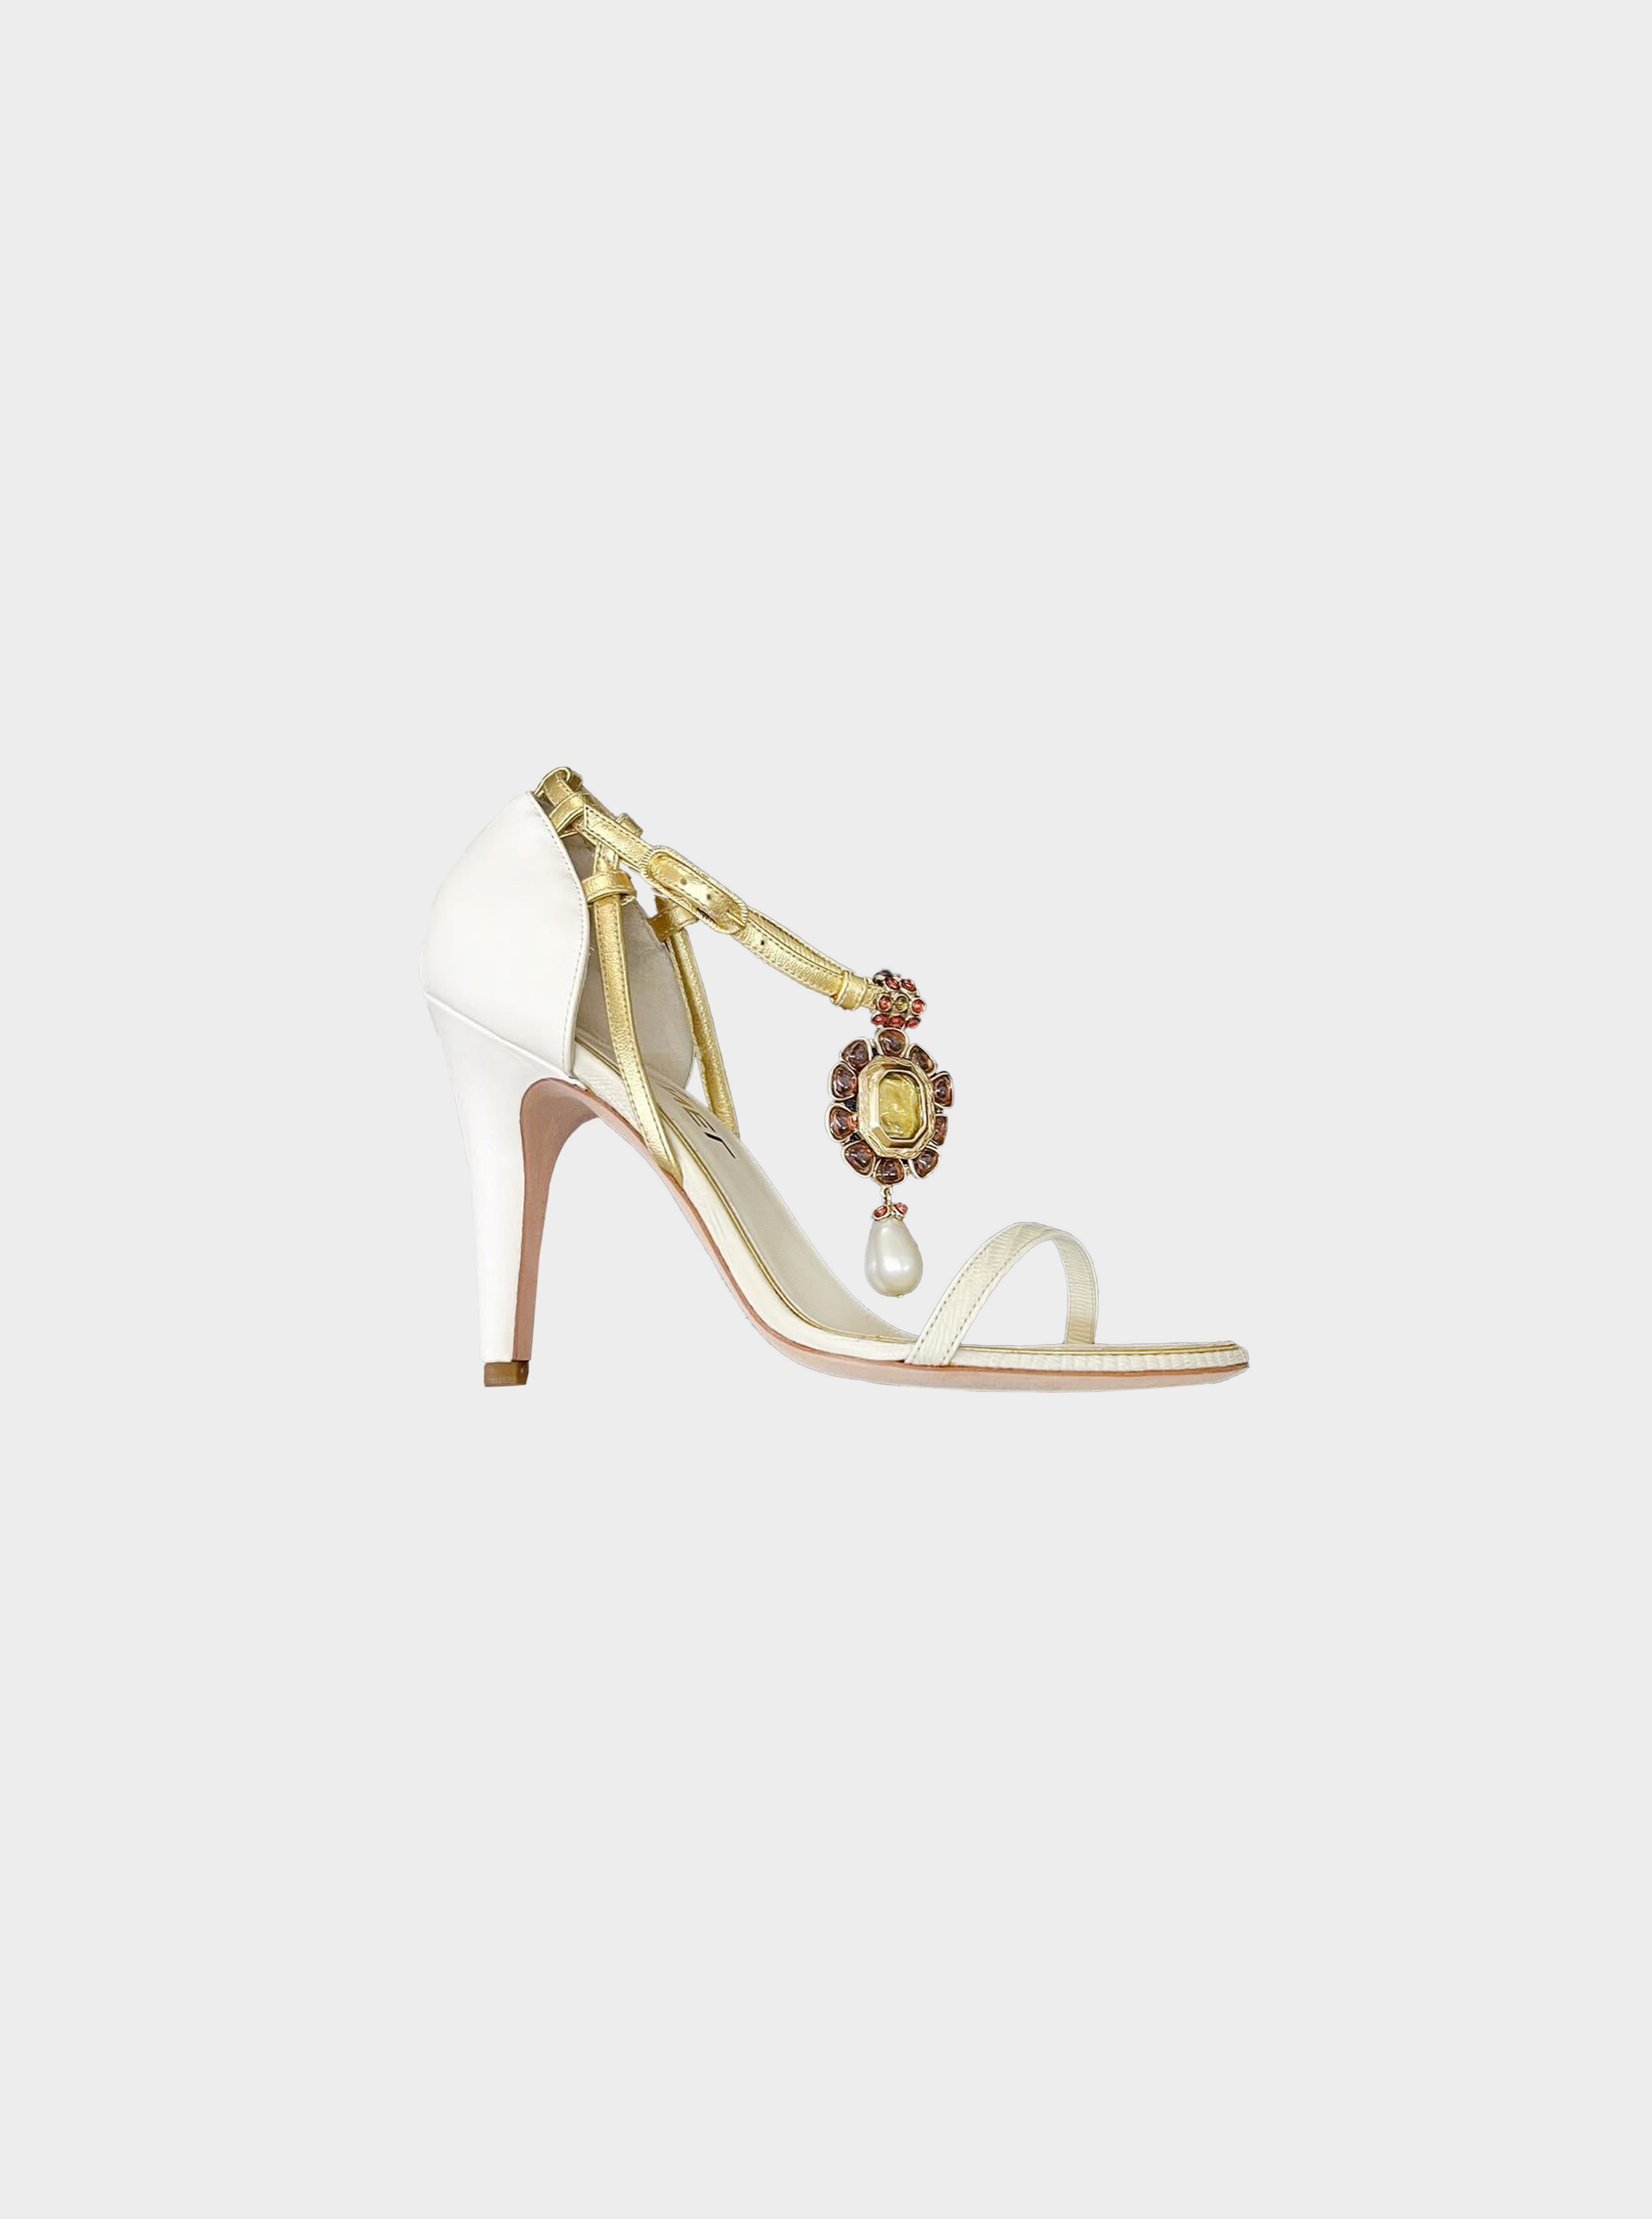 Chanel 2000s Beige Jeweled Pearl Pendant Sandals